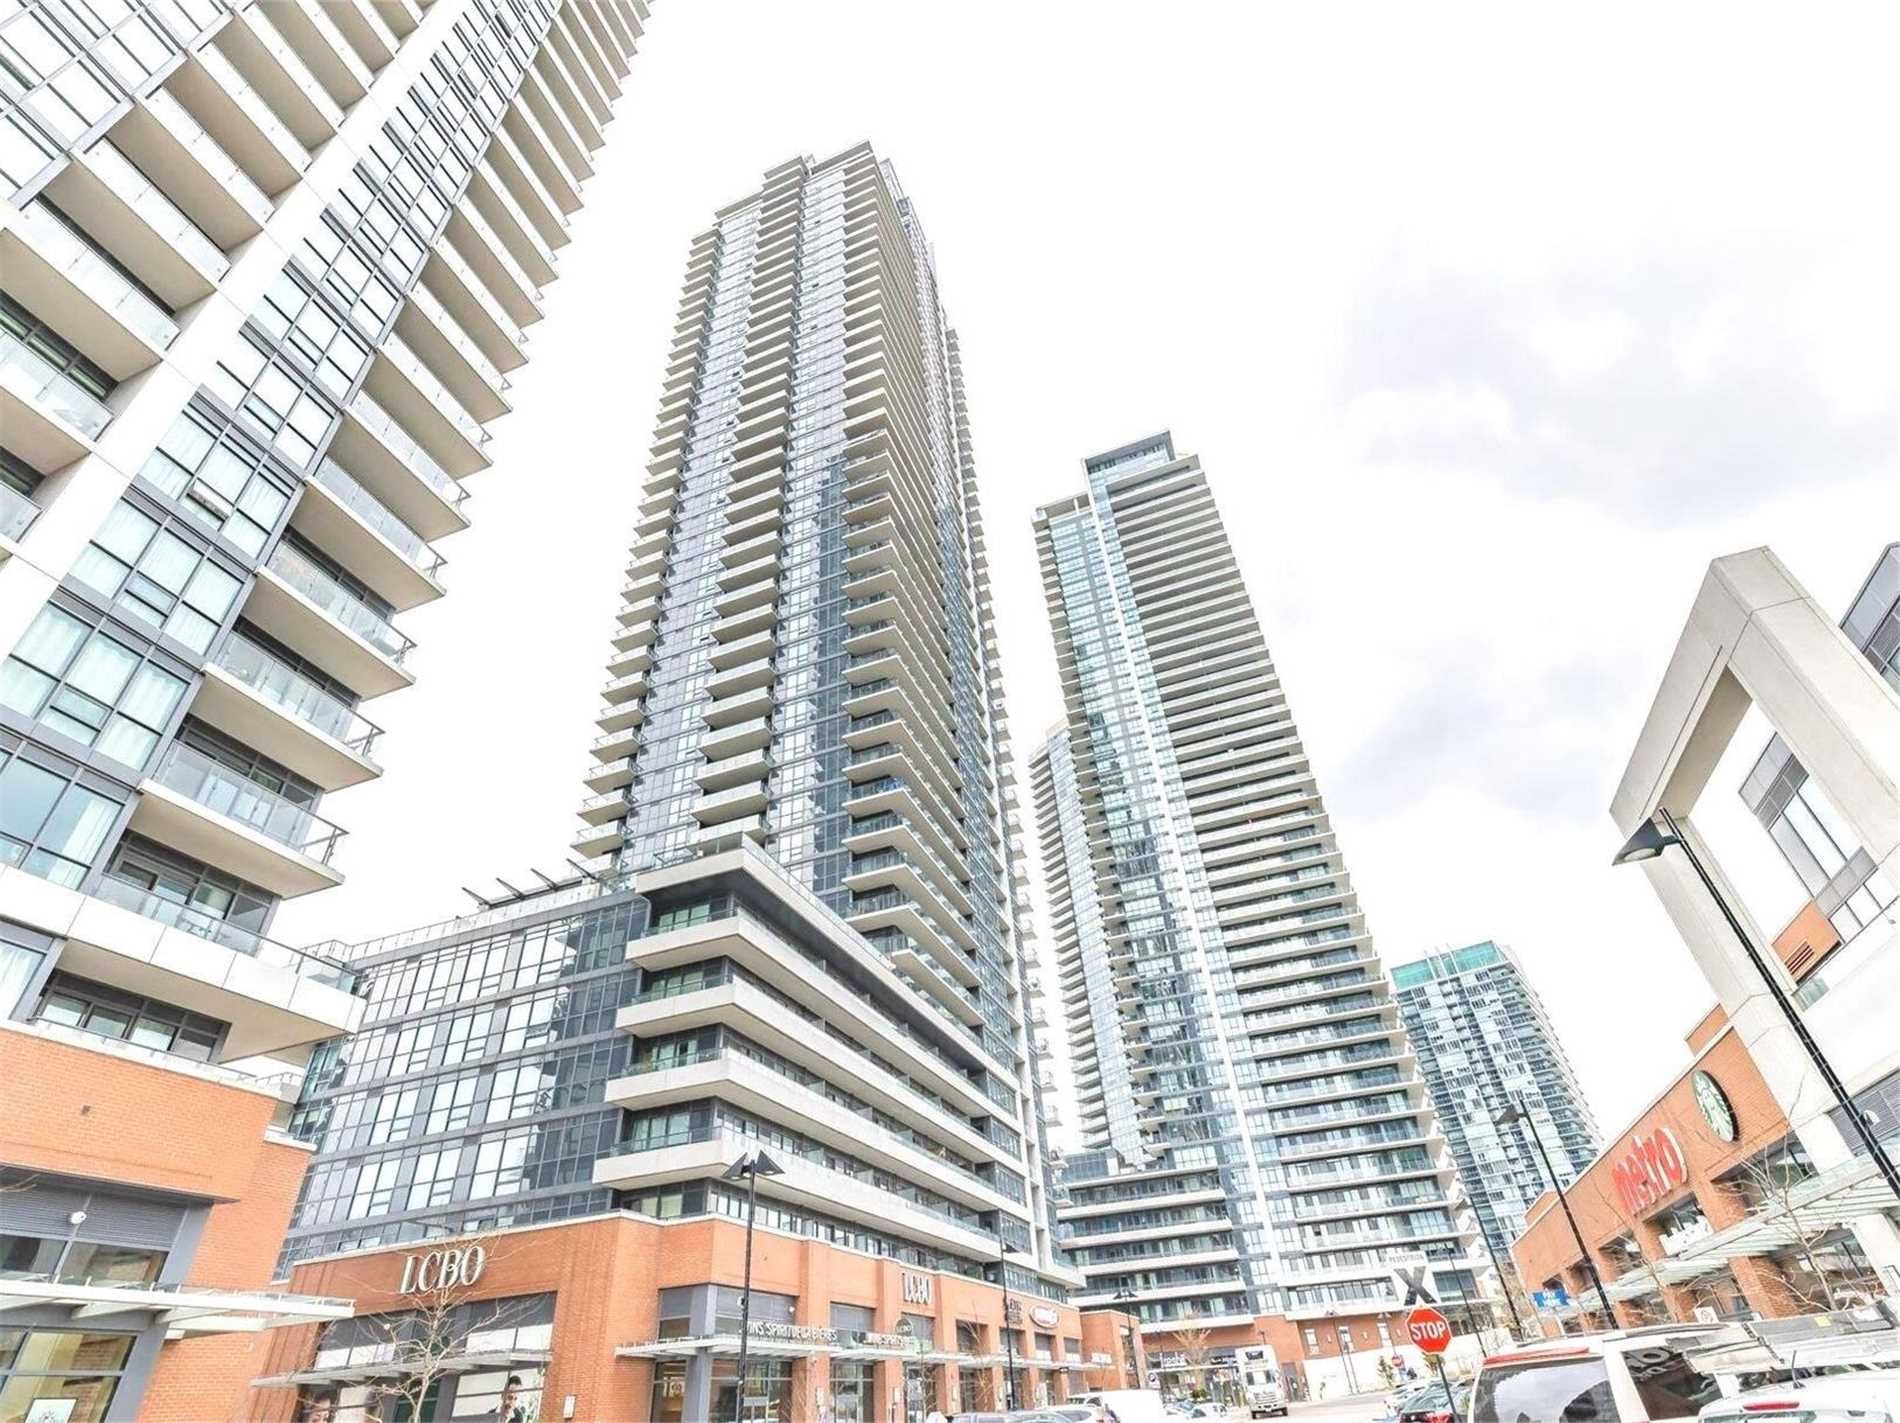 2220 Lake Shore Blvd W. This condo at Westlake Phase I Condos is located in  Etobicoke, Toronto - image #2 of 3 by Strata.ca